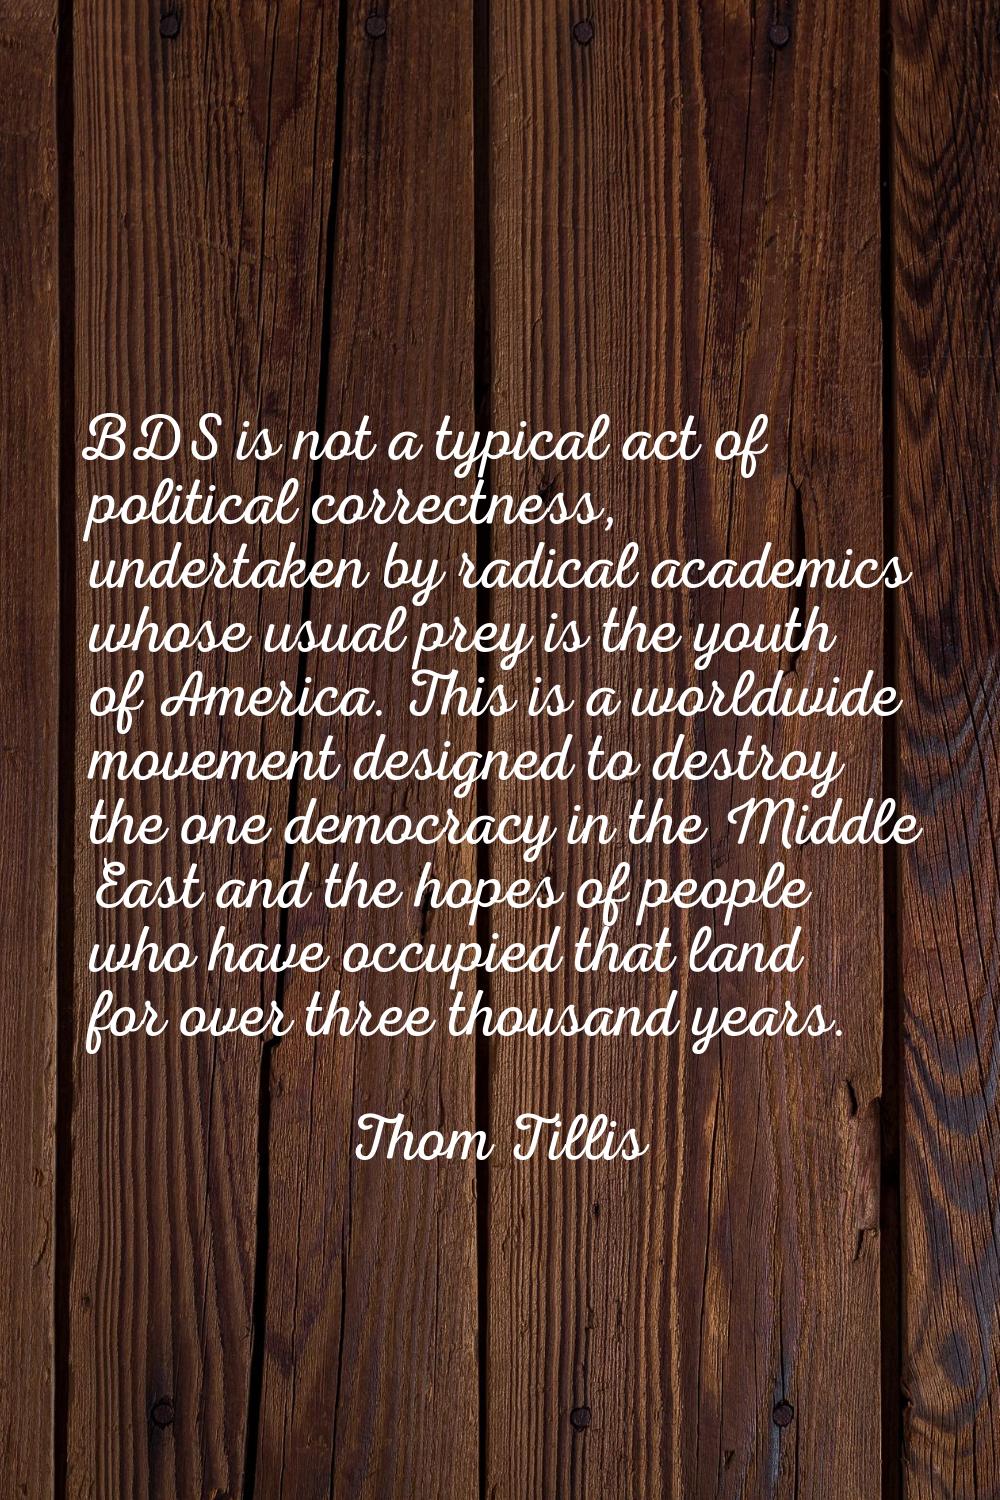 BDS is not a typical act of political correctness, undertaken by radical academics whose usual prey